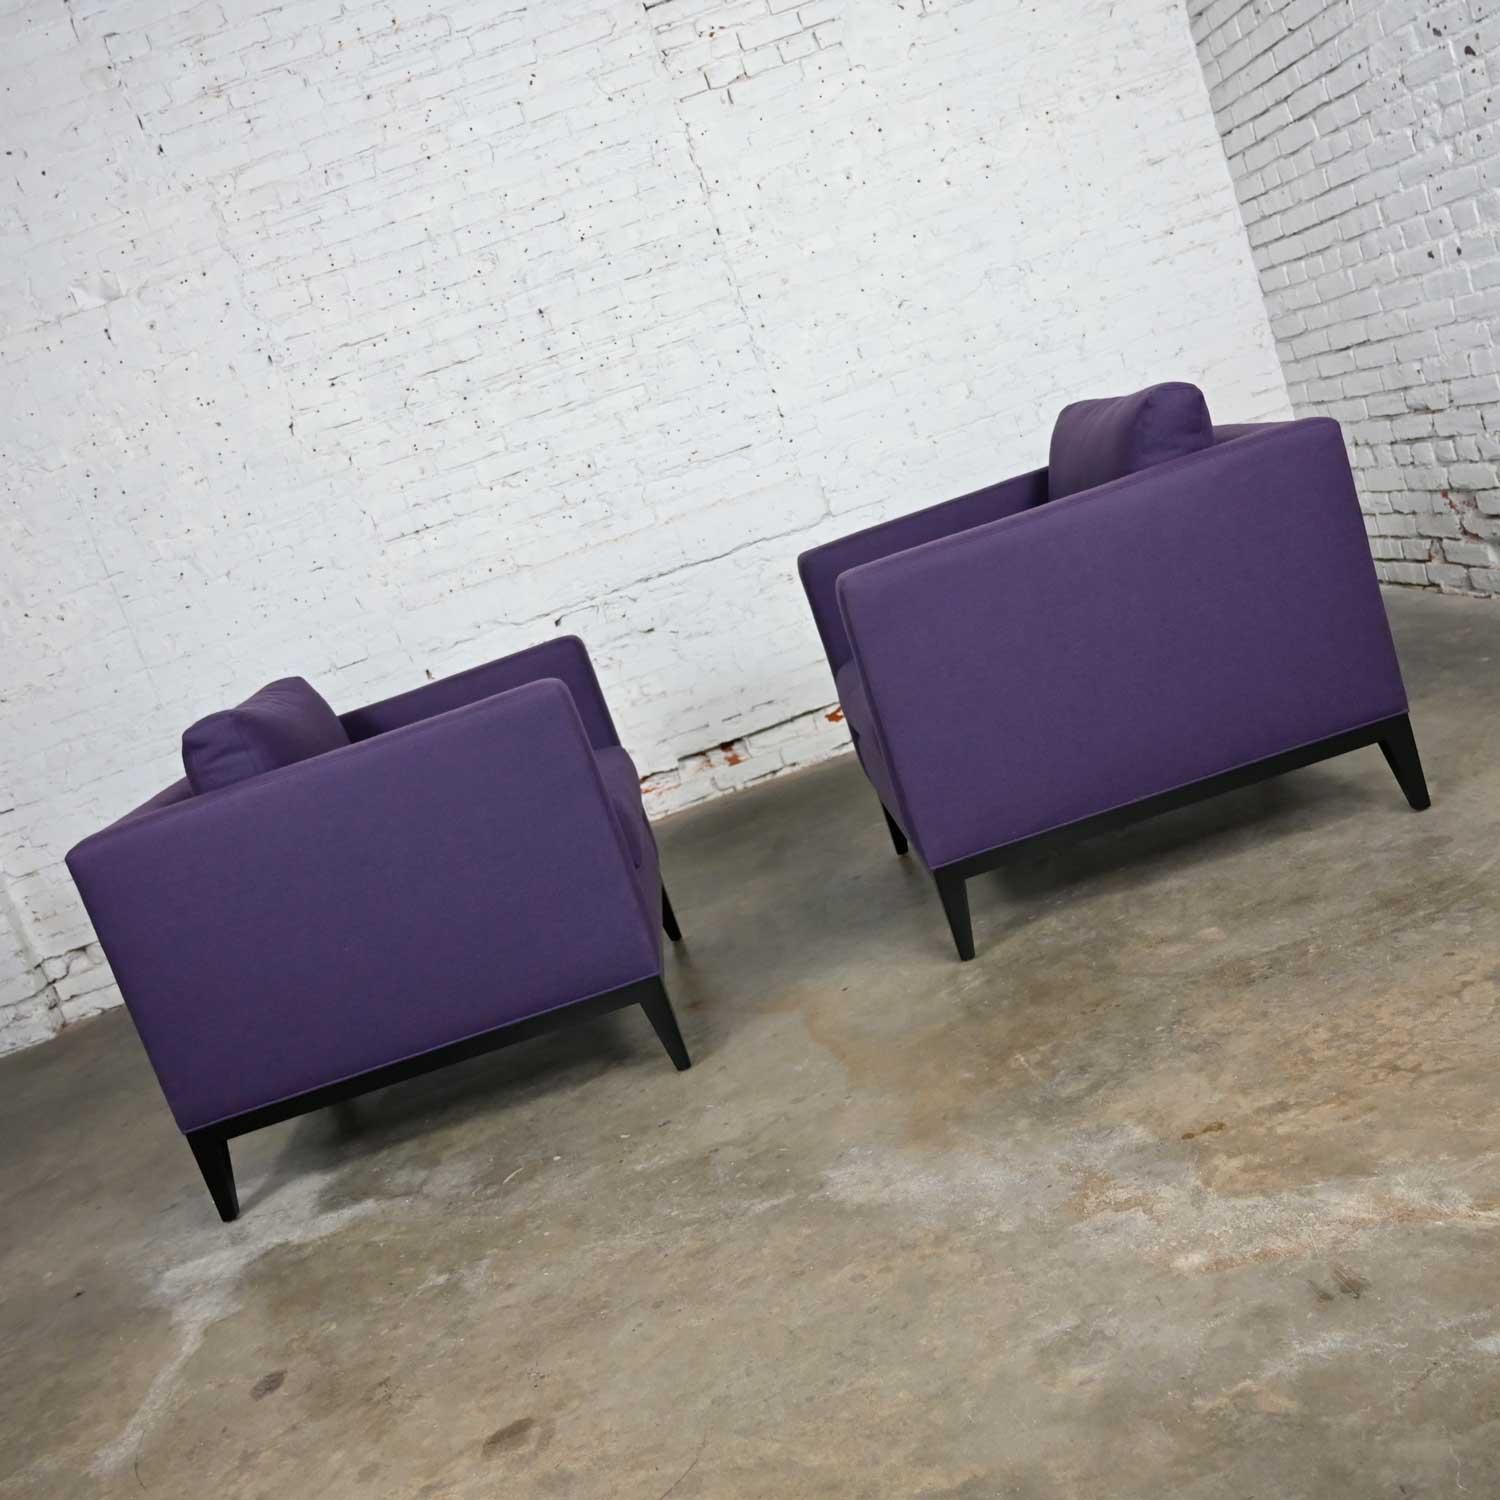 Modern Purple Plum Tone Tuxedo Style Club Chairs by Baker a Pair For Sale 3